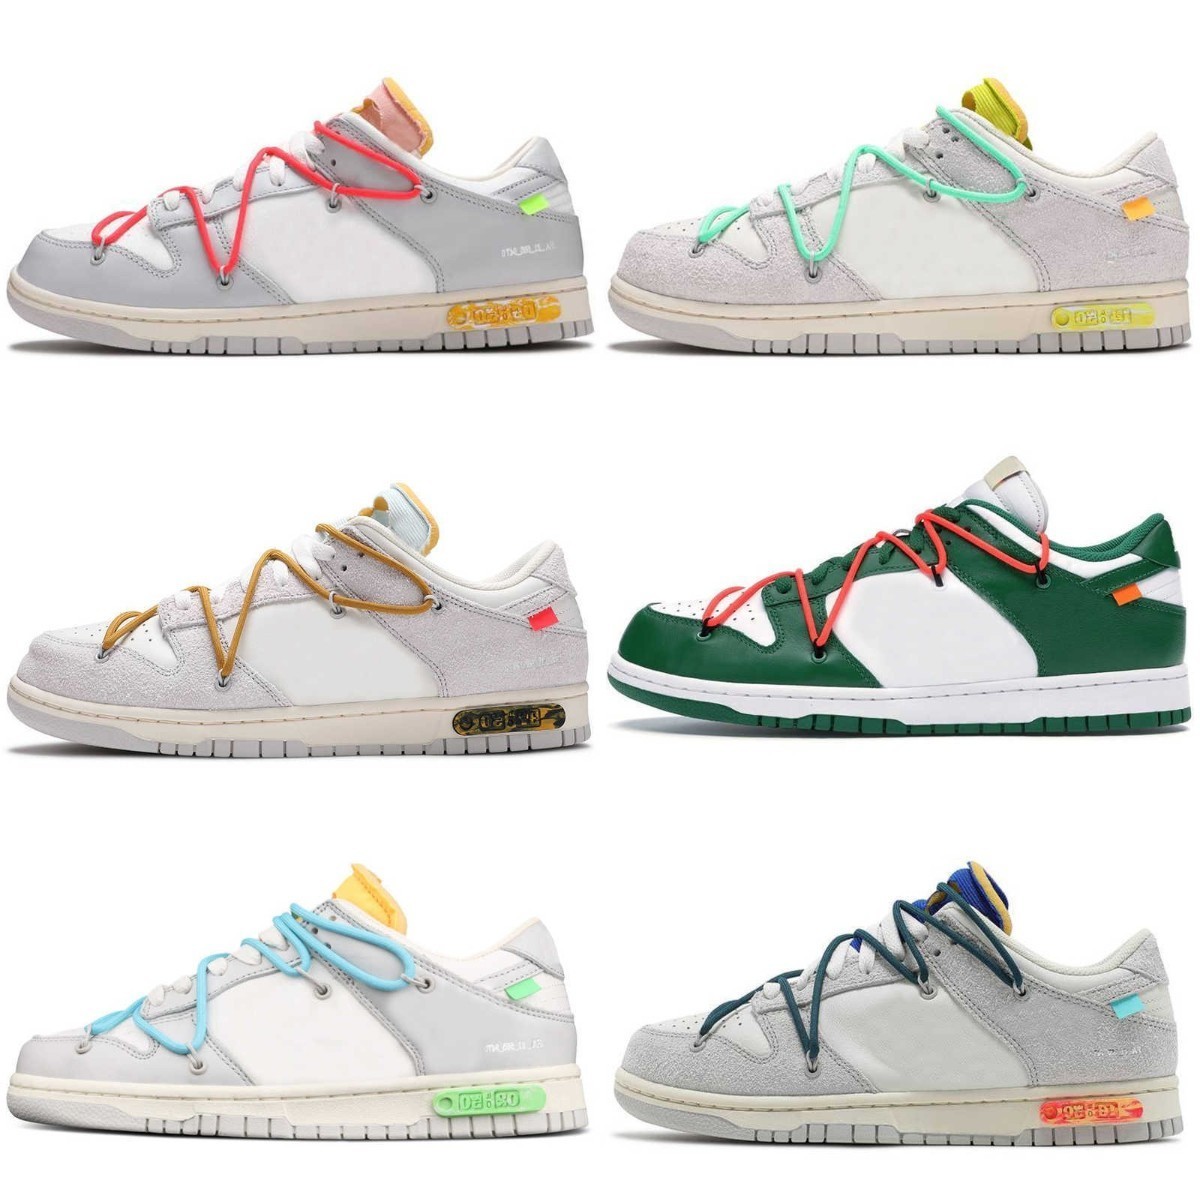 

Designers Dunksb Casual Shoes SBdunk Dear Summer Lot 1 09 Of 50 Collection Red Pine Orange Green SB DunkEs Low White OW The 50 TS Trainer Chunky UNC Mens Women Sneakers Y8, Please contact us